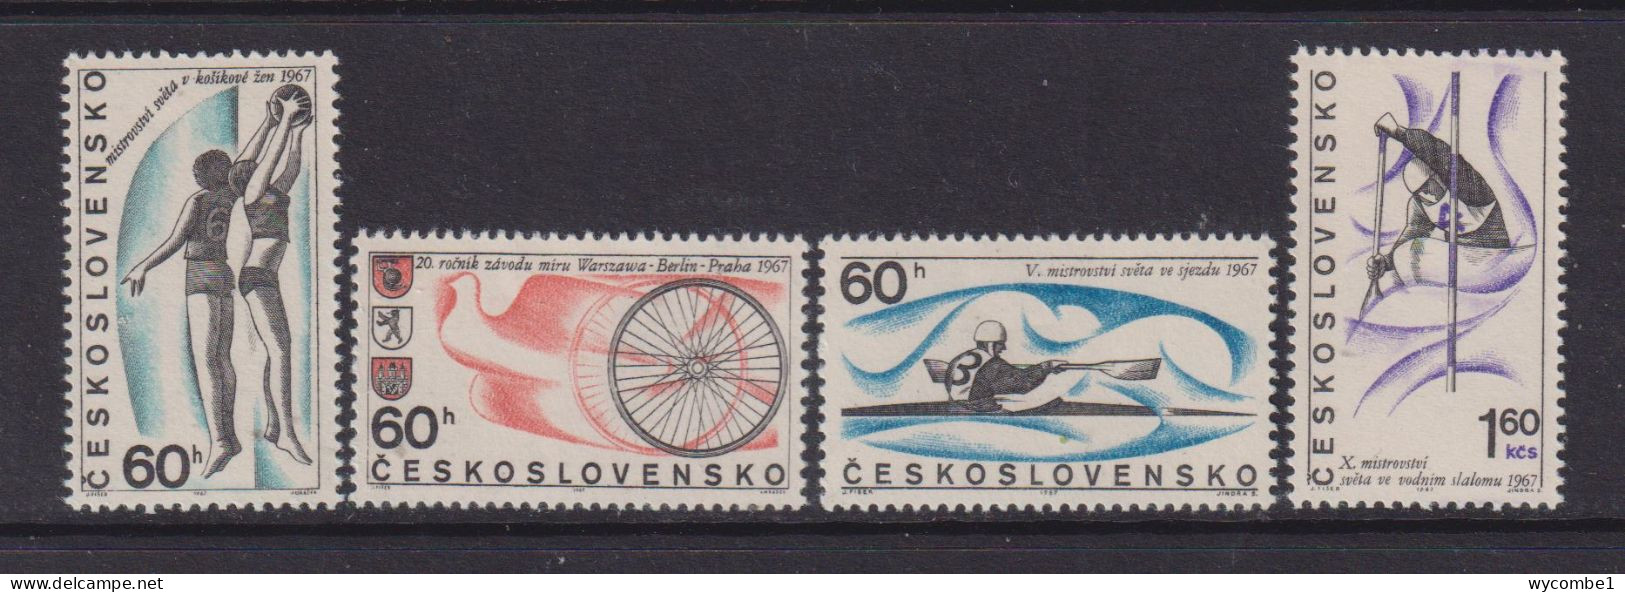 CZECHOSLOVAKIA  - 1967 Sports Events Set Never Hinged Mint - Unused Stamps